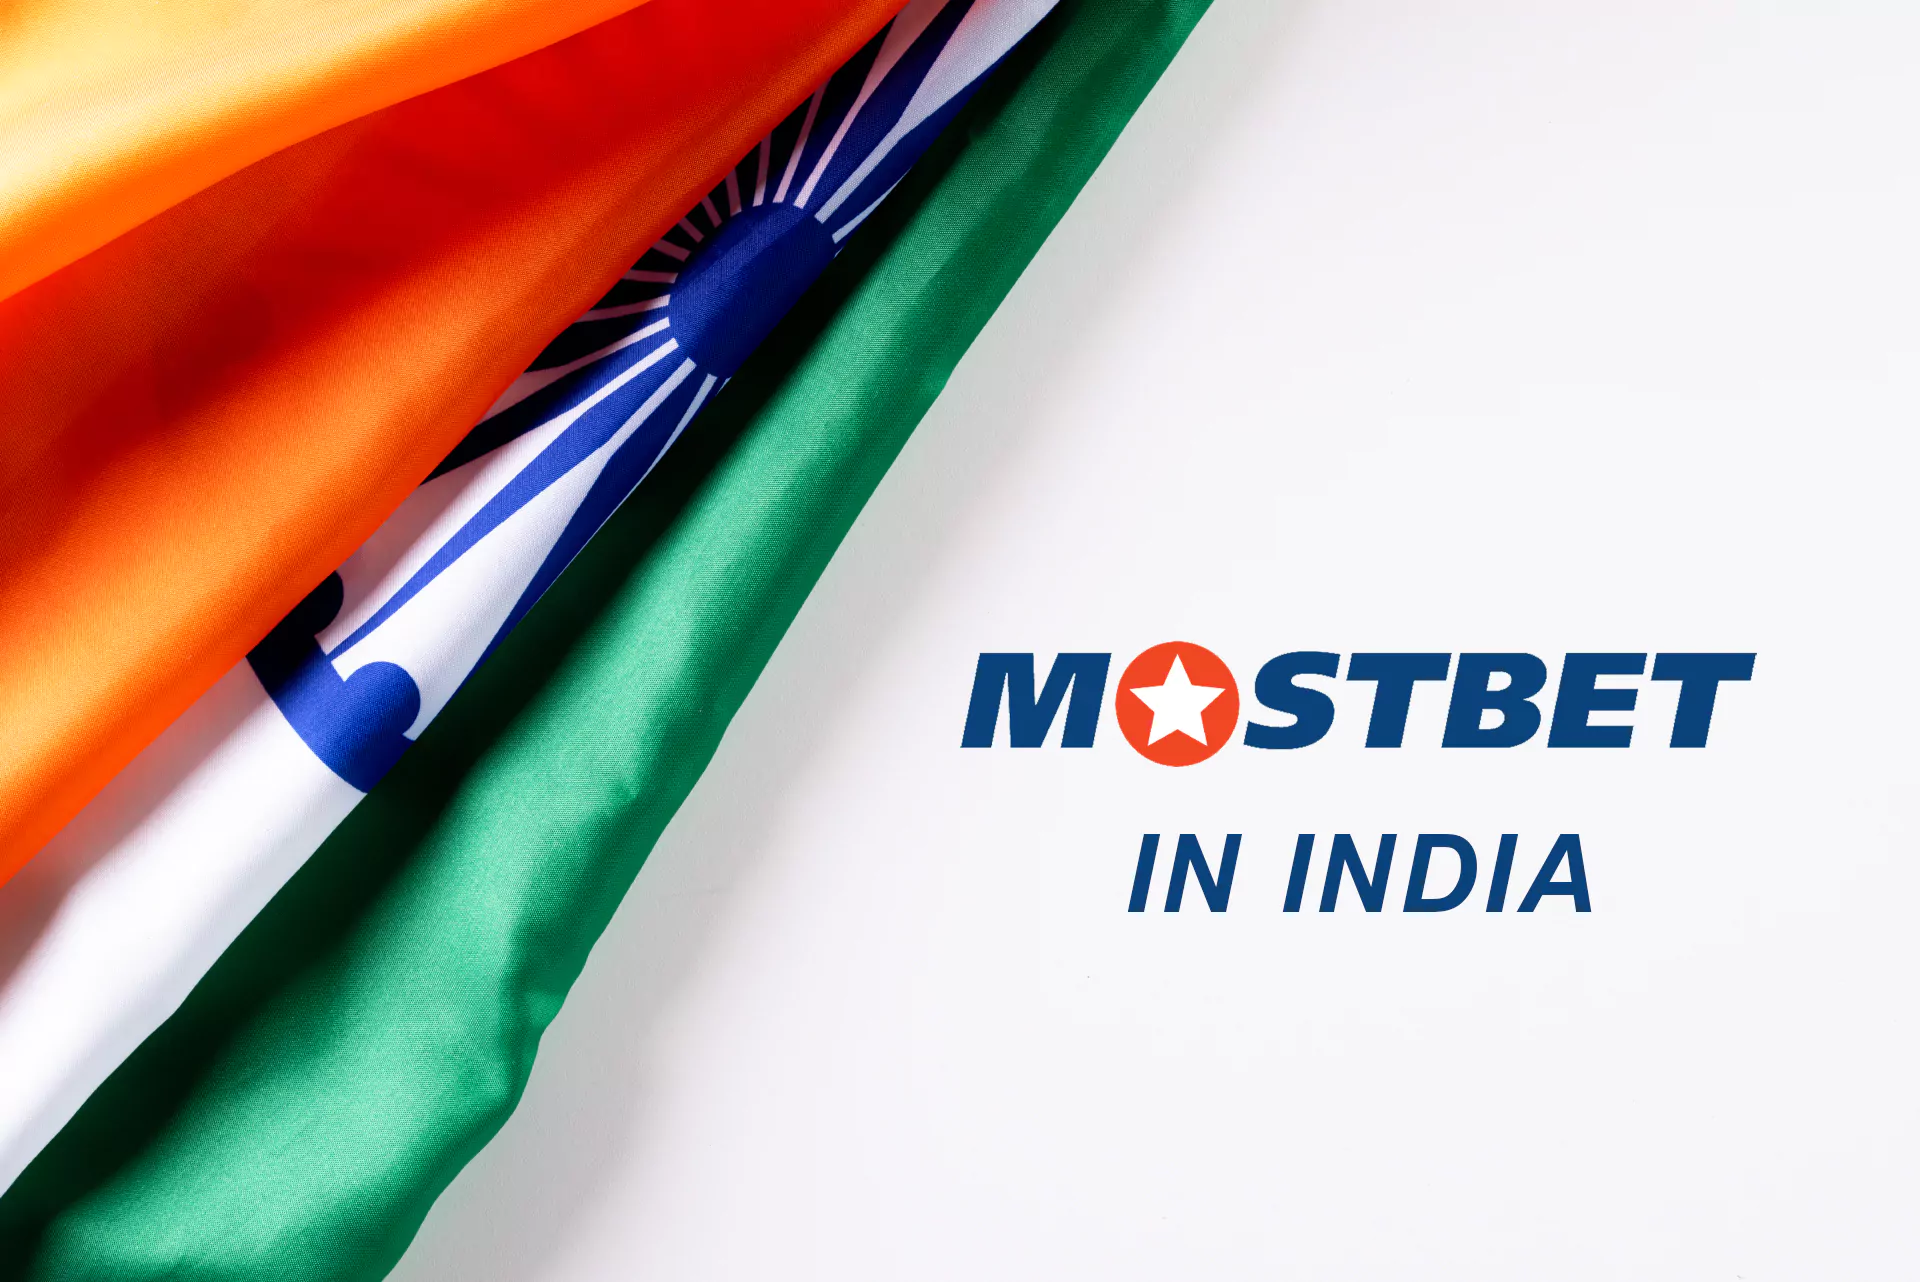 Mostbet provides plenty of sports and eSports events and is quite popular among Indian betting fans.